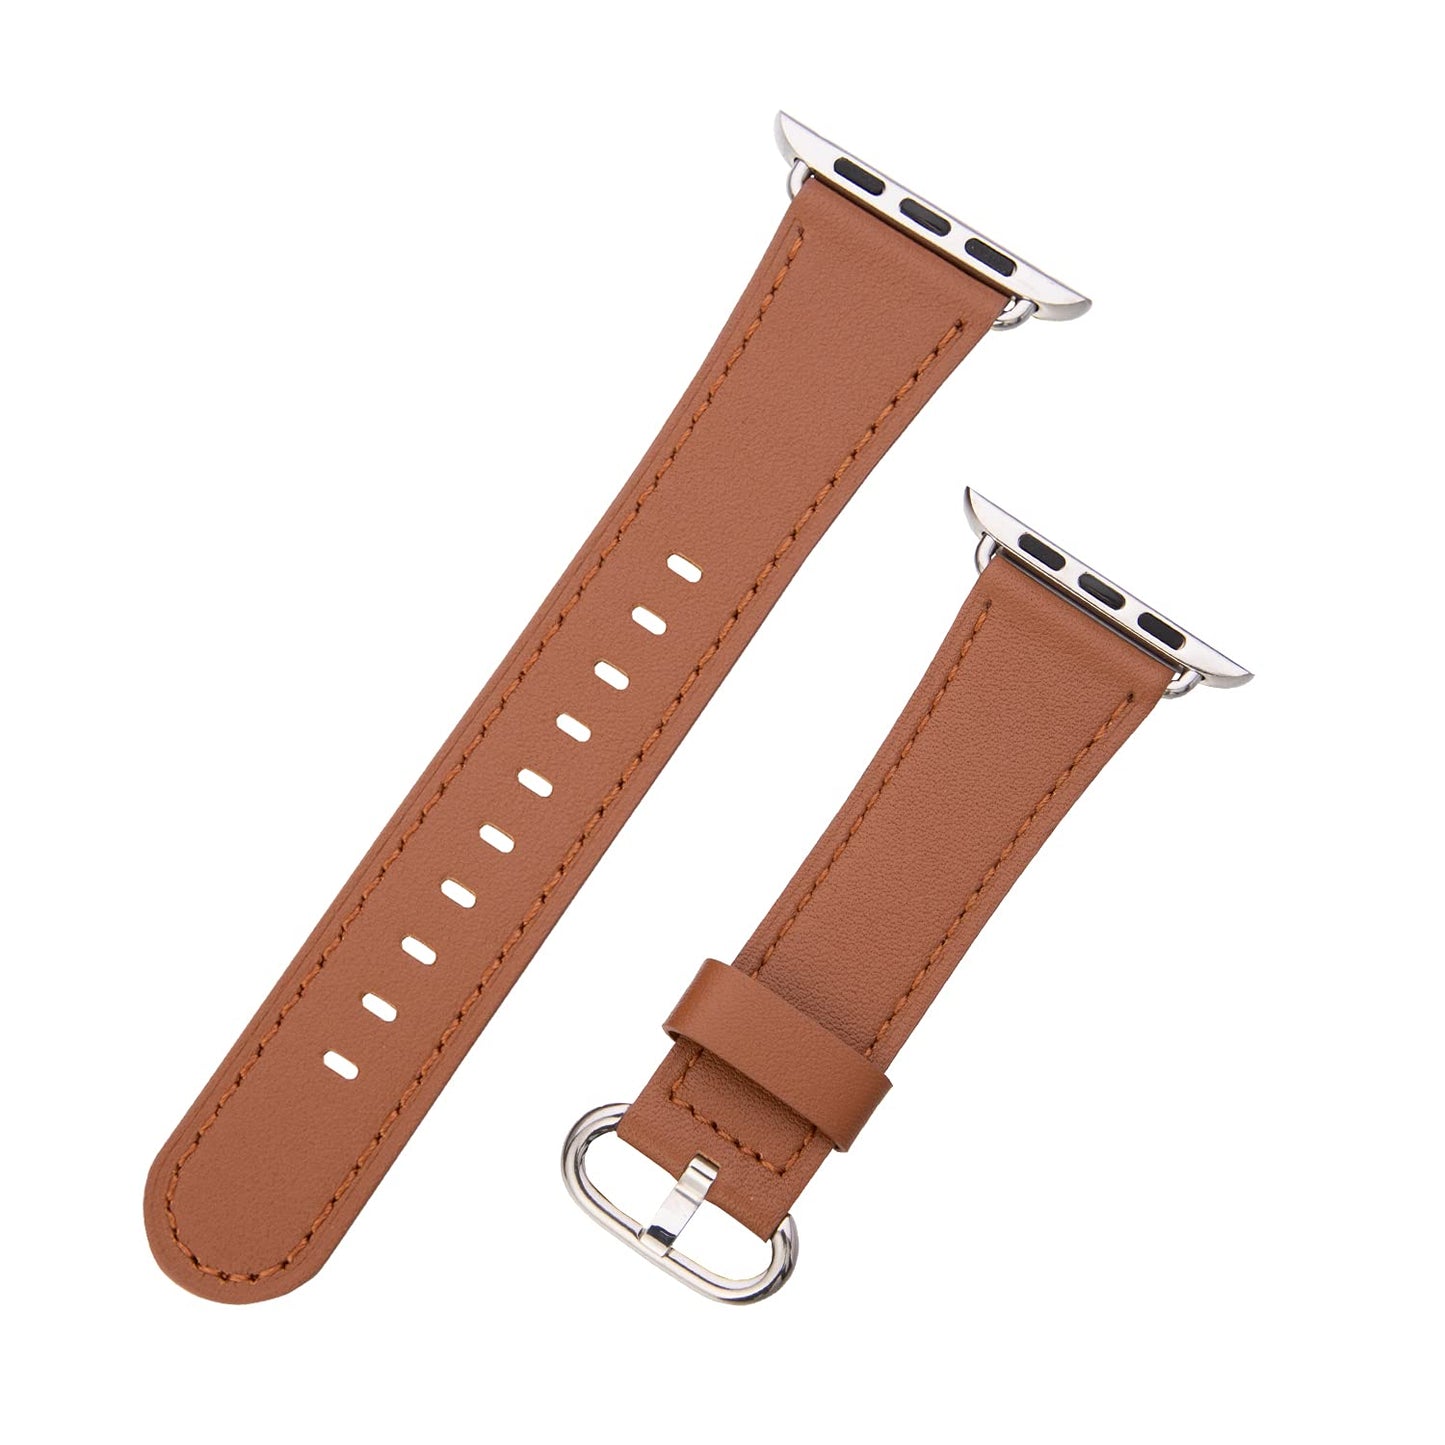 Classic Strap for Apple Watch